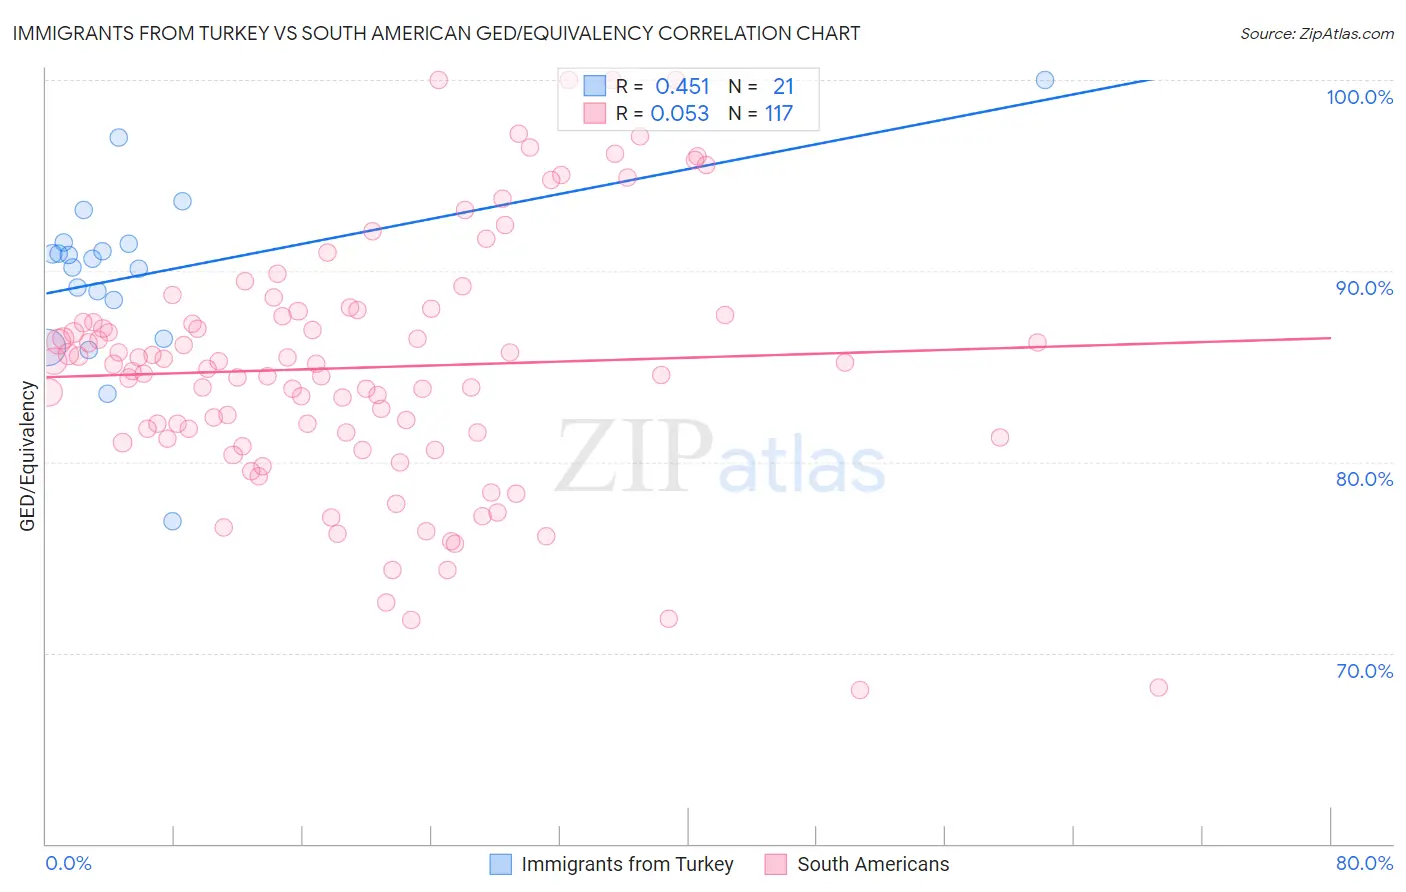 Immigrants from Turkey vs South American GED/Equivalency